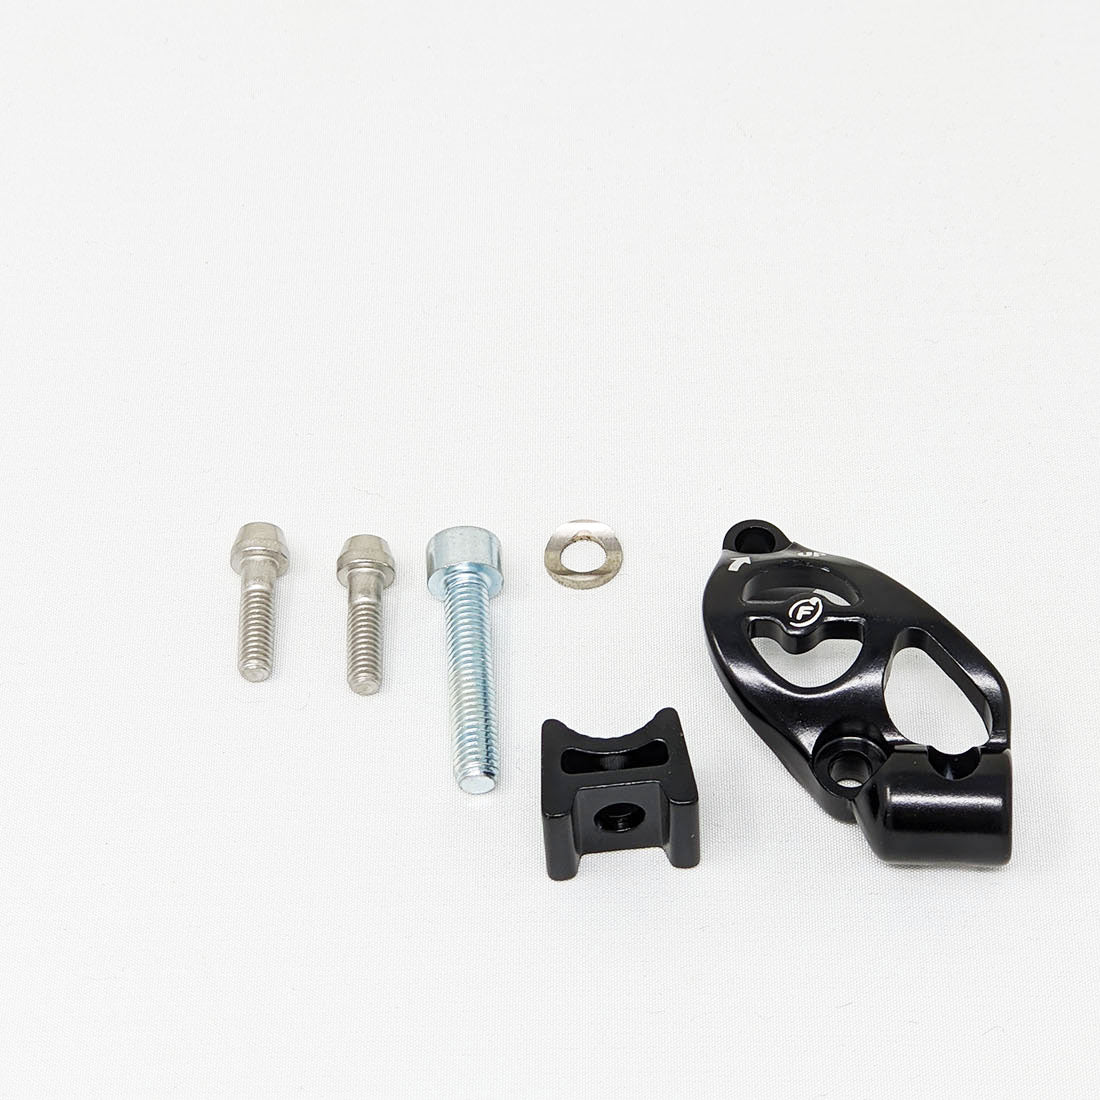 R1 Racing Right master cylinder glossy black clamp and screws (Sram MixMaster)